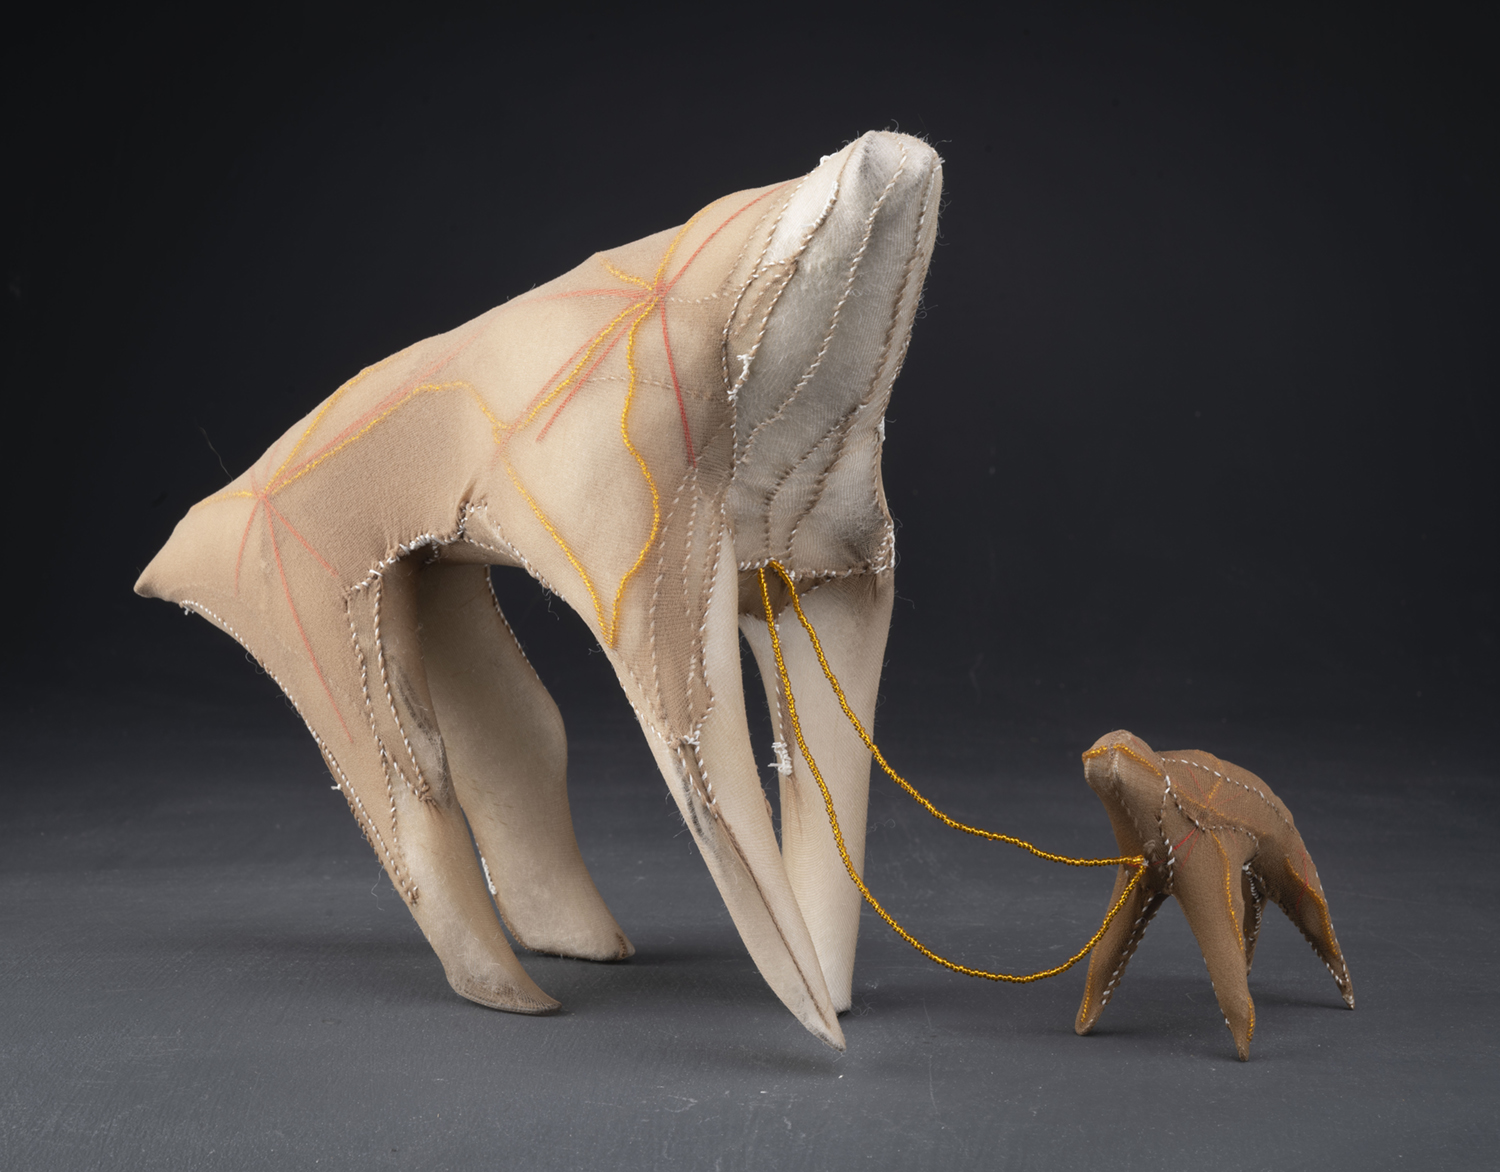 Sculptures of a mother bear and her cub, courtesy of the artist